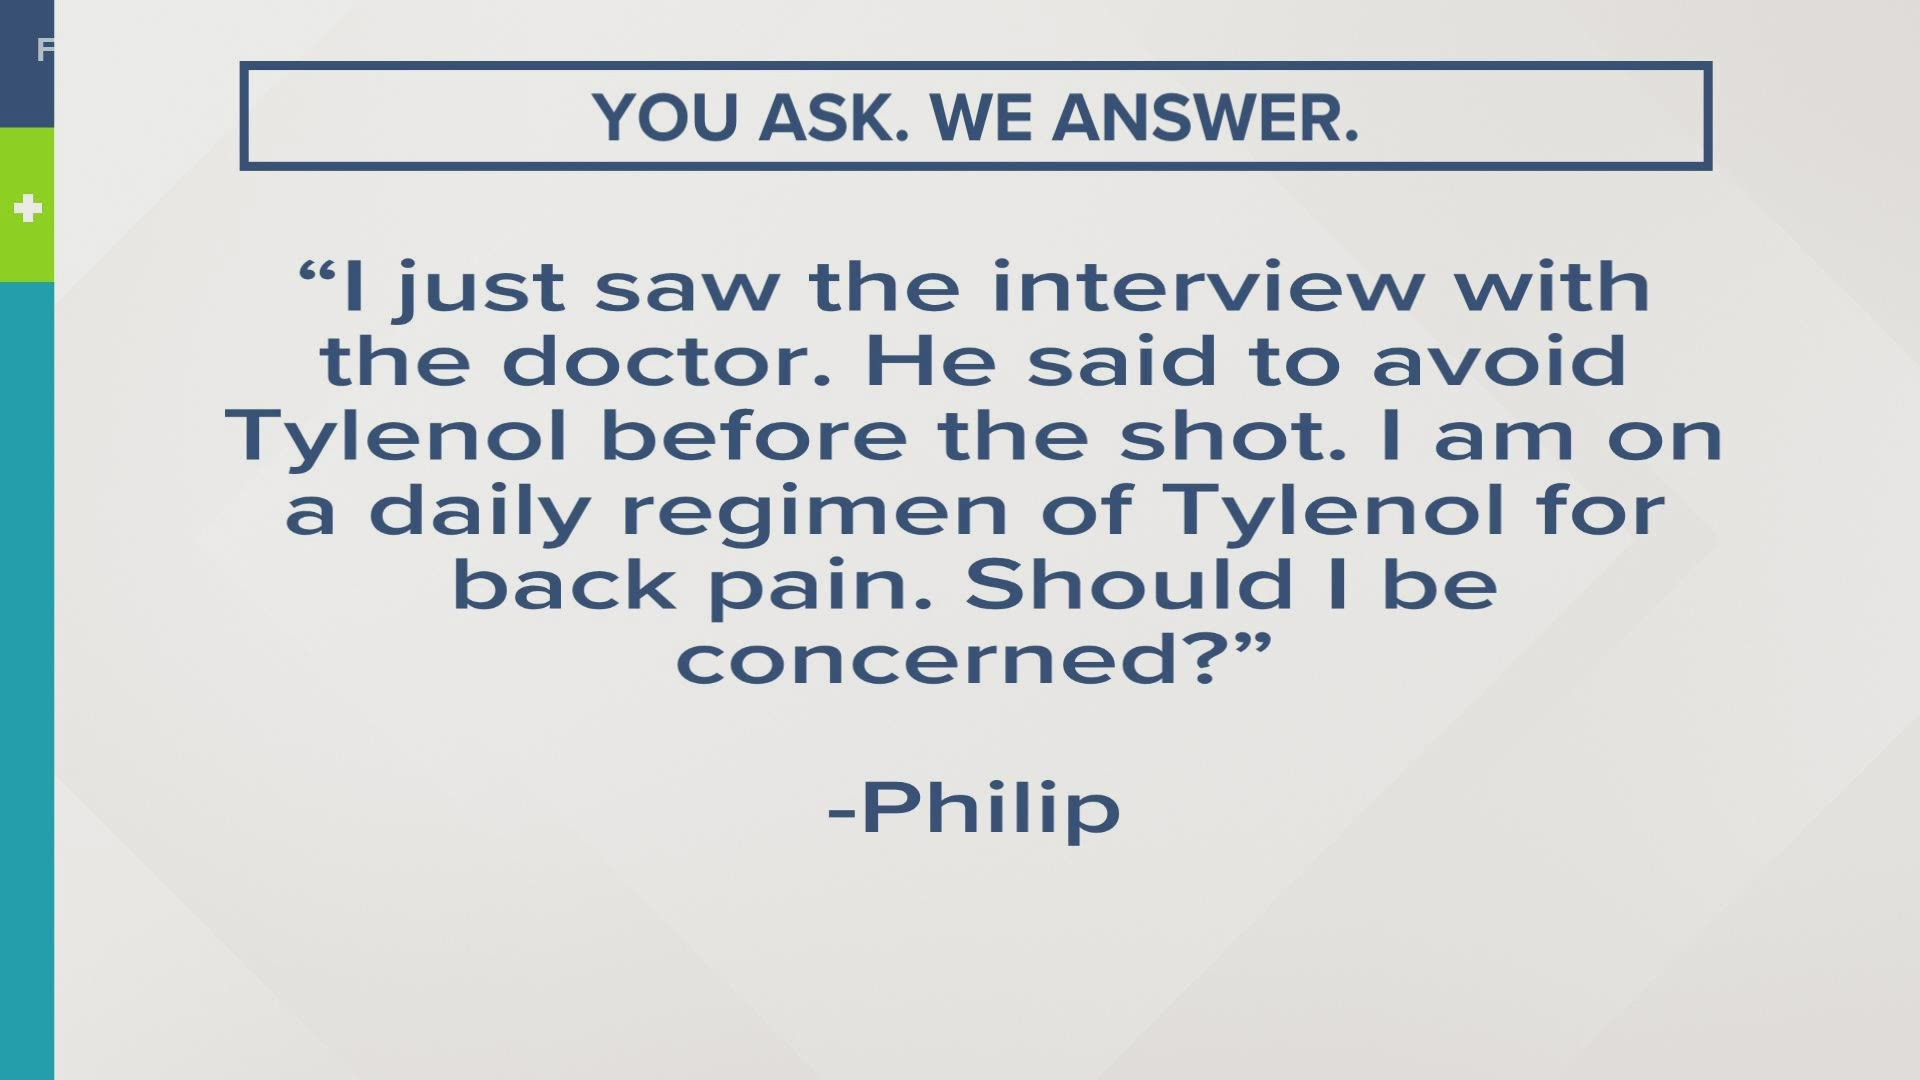 If you have a question about COVID-19 or the vaccine, email SHARE61@fox61.com or text 860-527-6161.